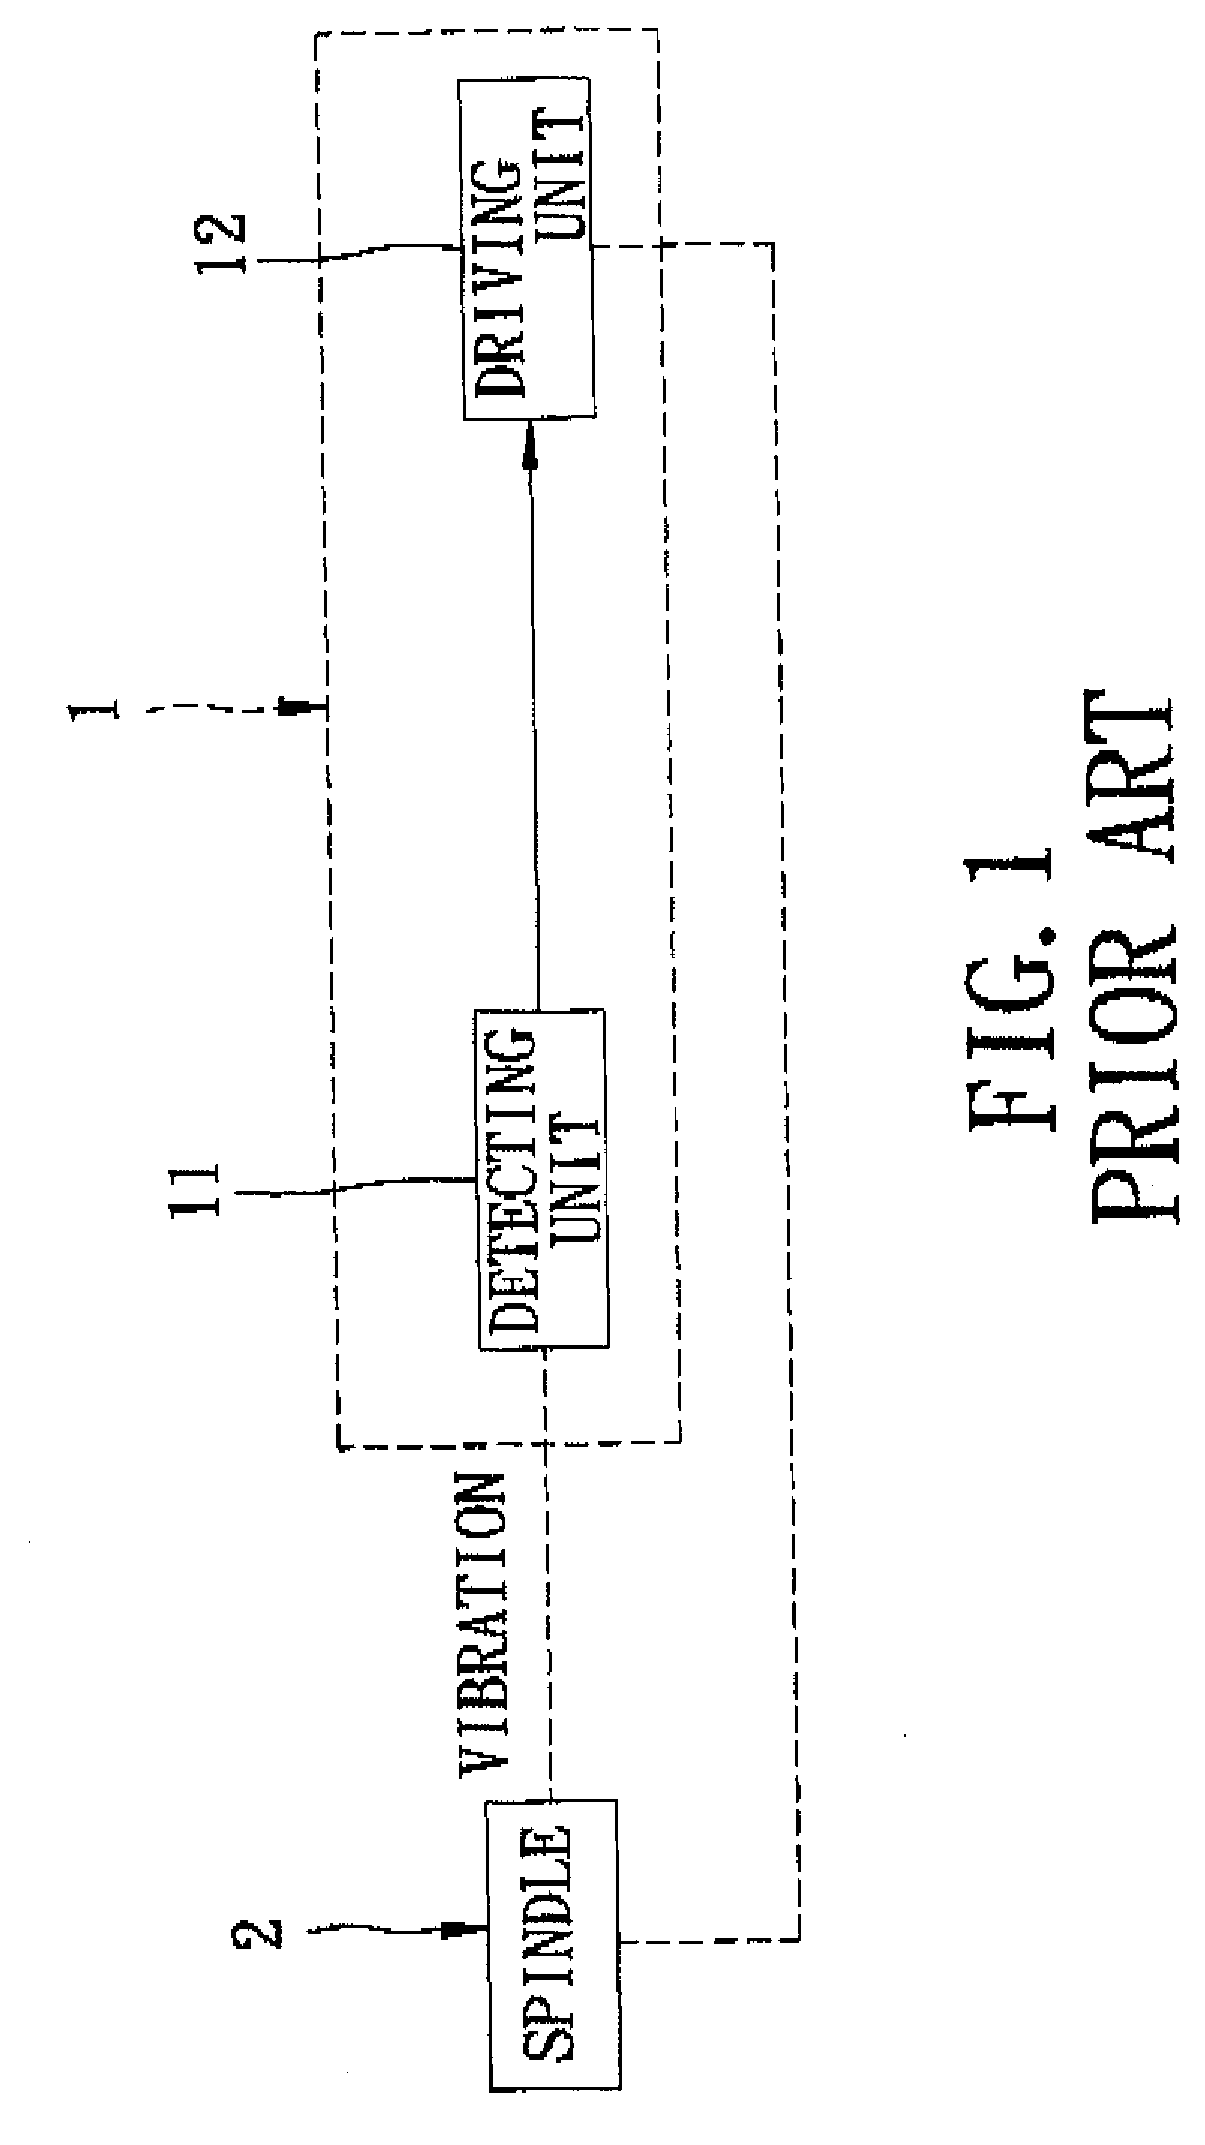 Method and module for controlling rotation of a motorized spindle